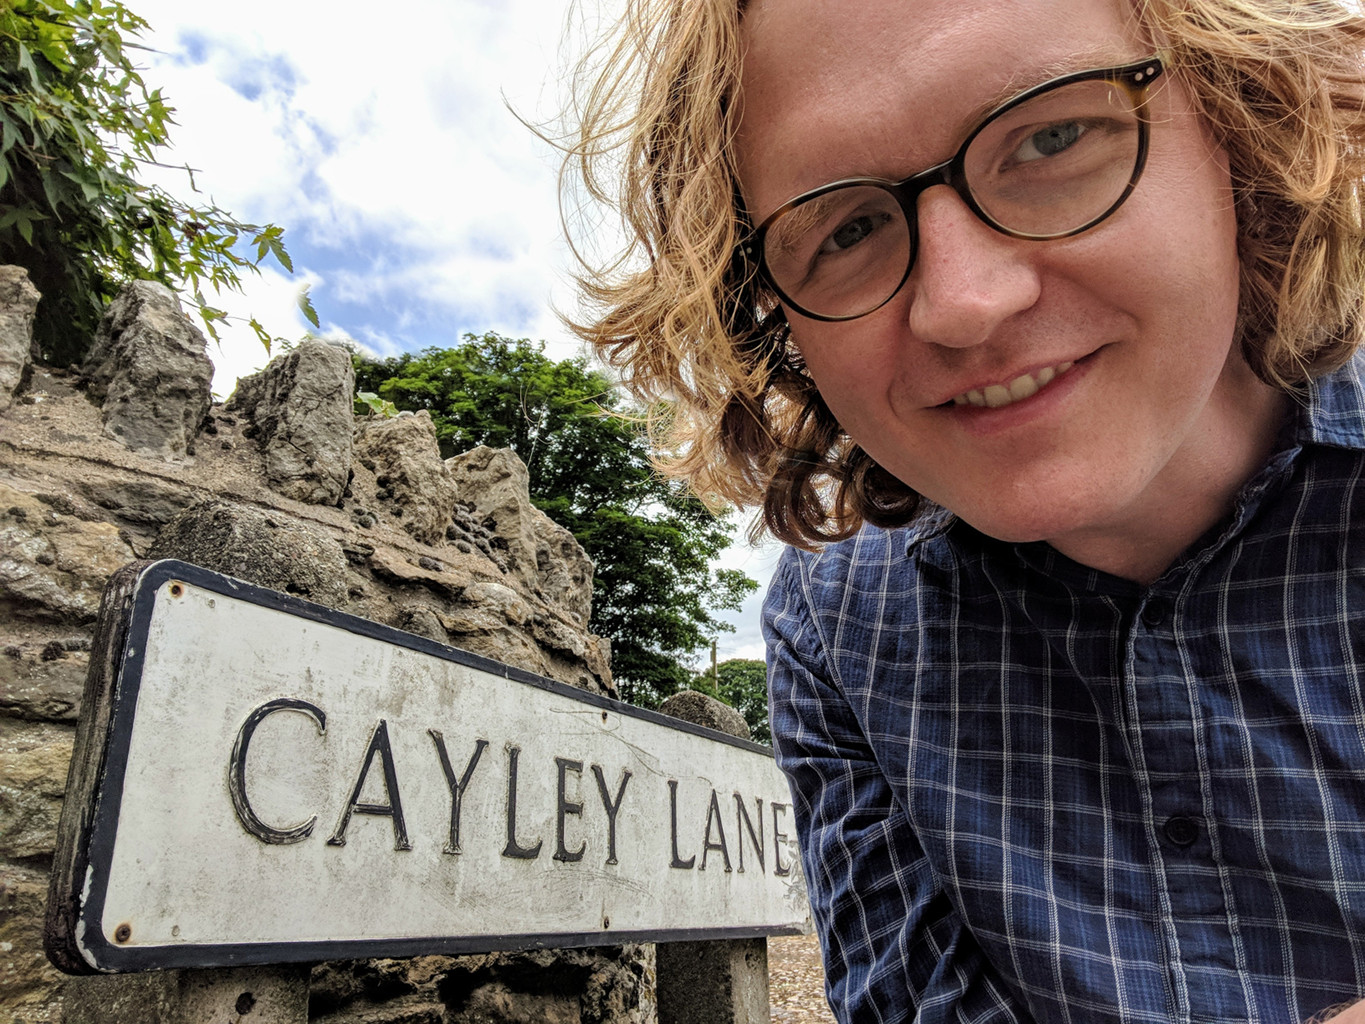 Carl McTague on Cayley Lane (2018)